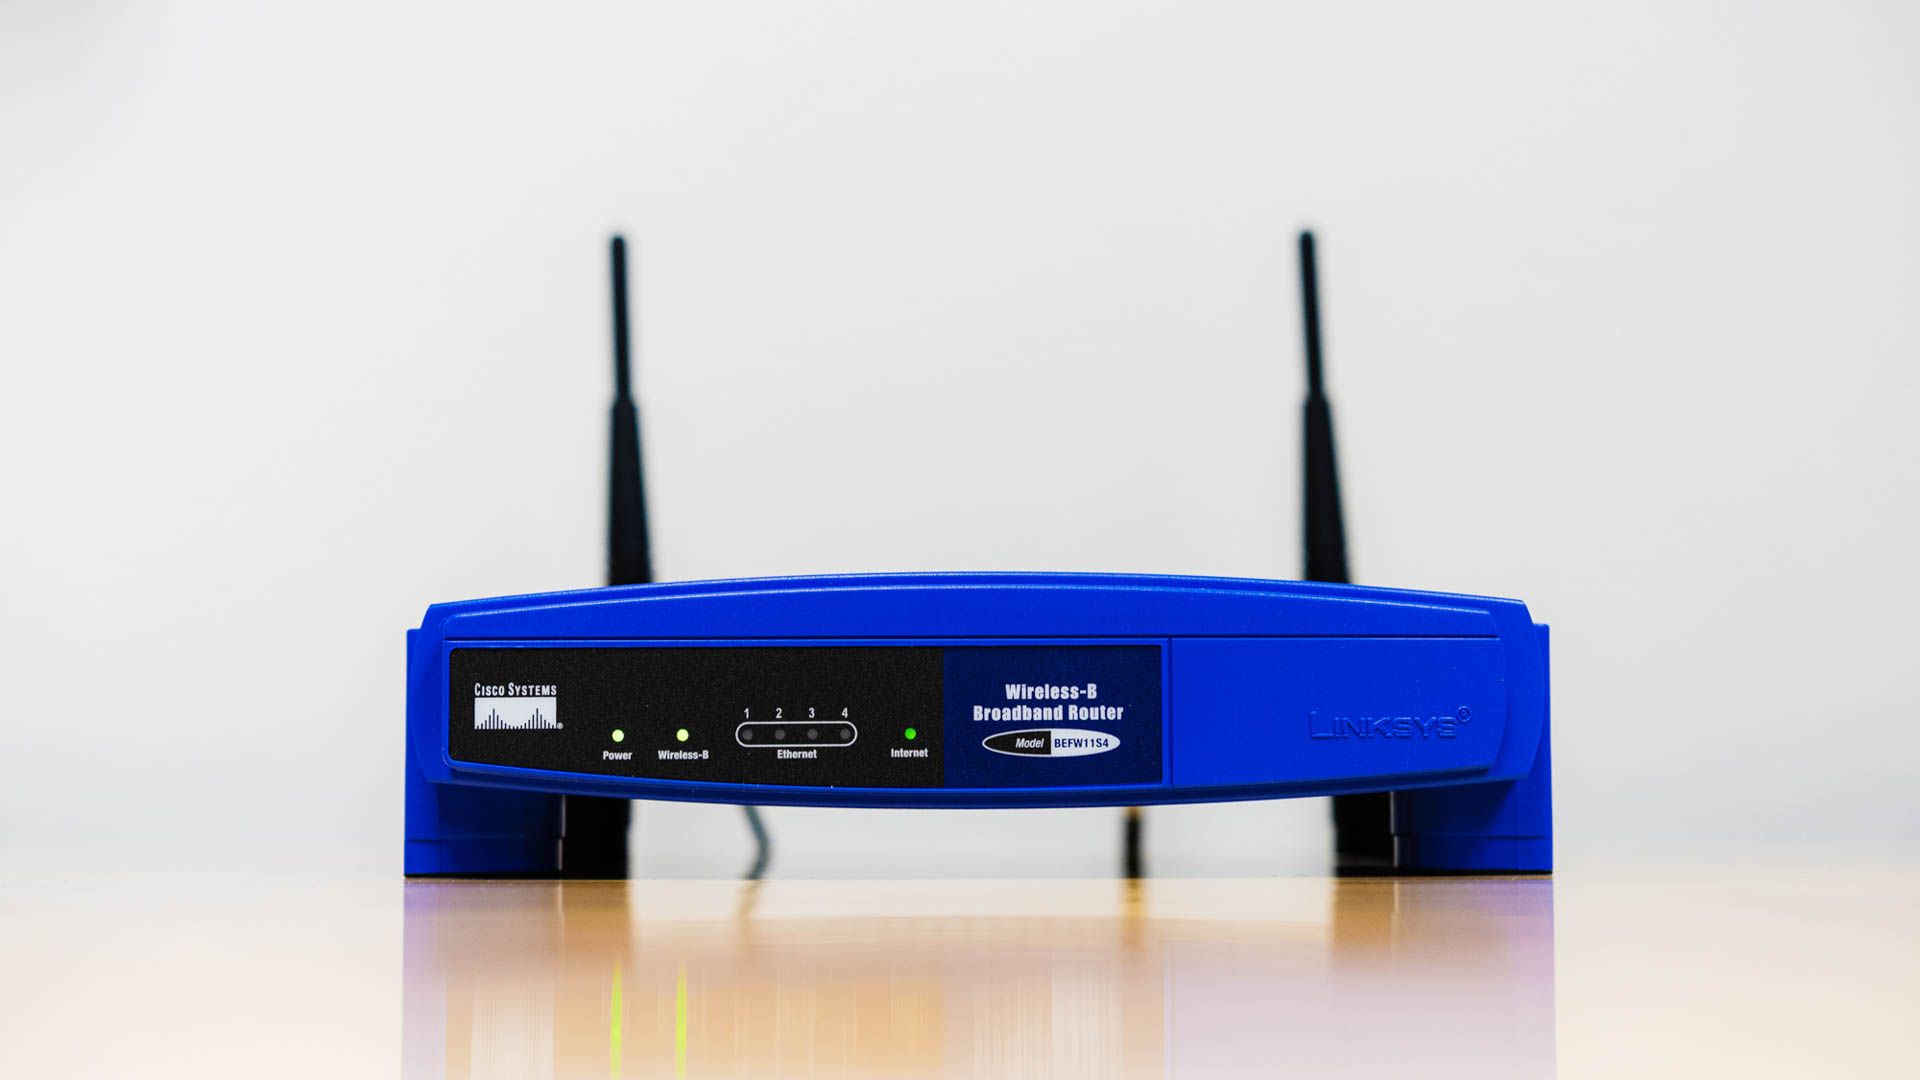 Is Your Router’s Wi-Fi Performance Limiting Your Internet Speed? Here’s How to Tell